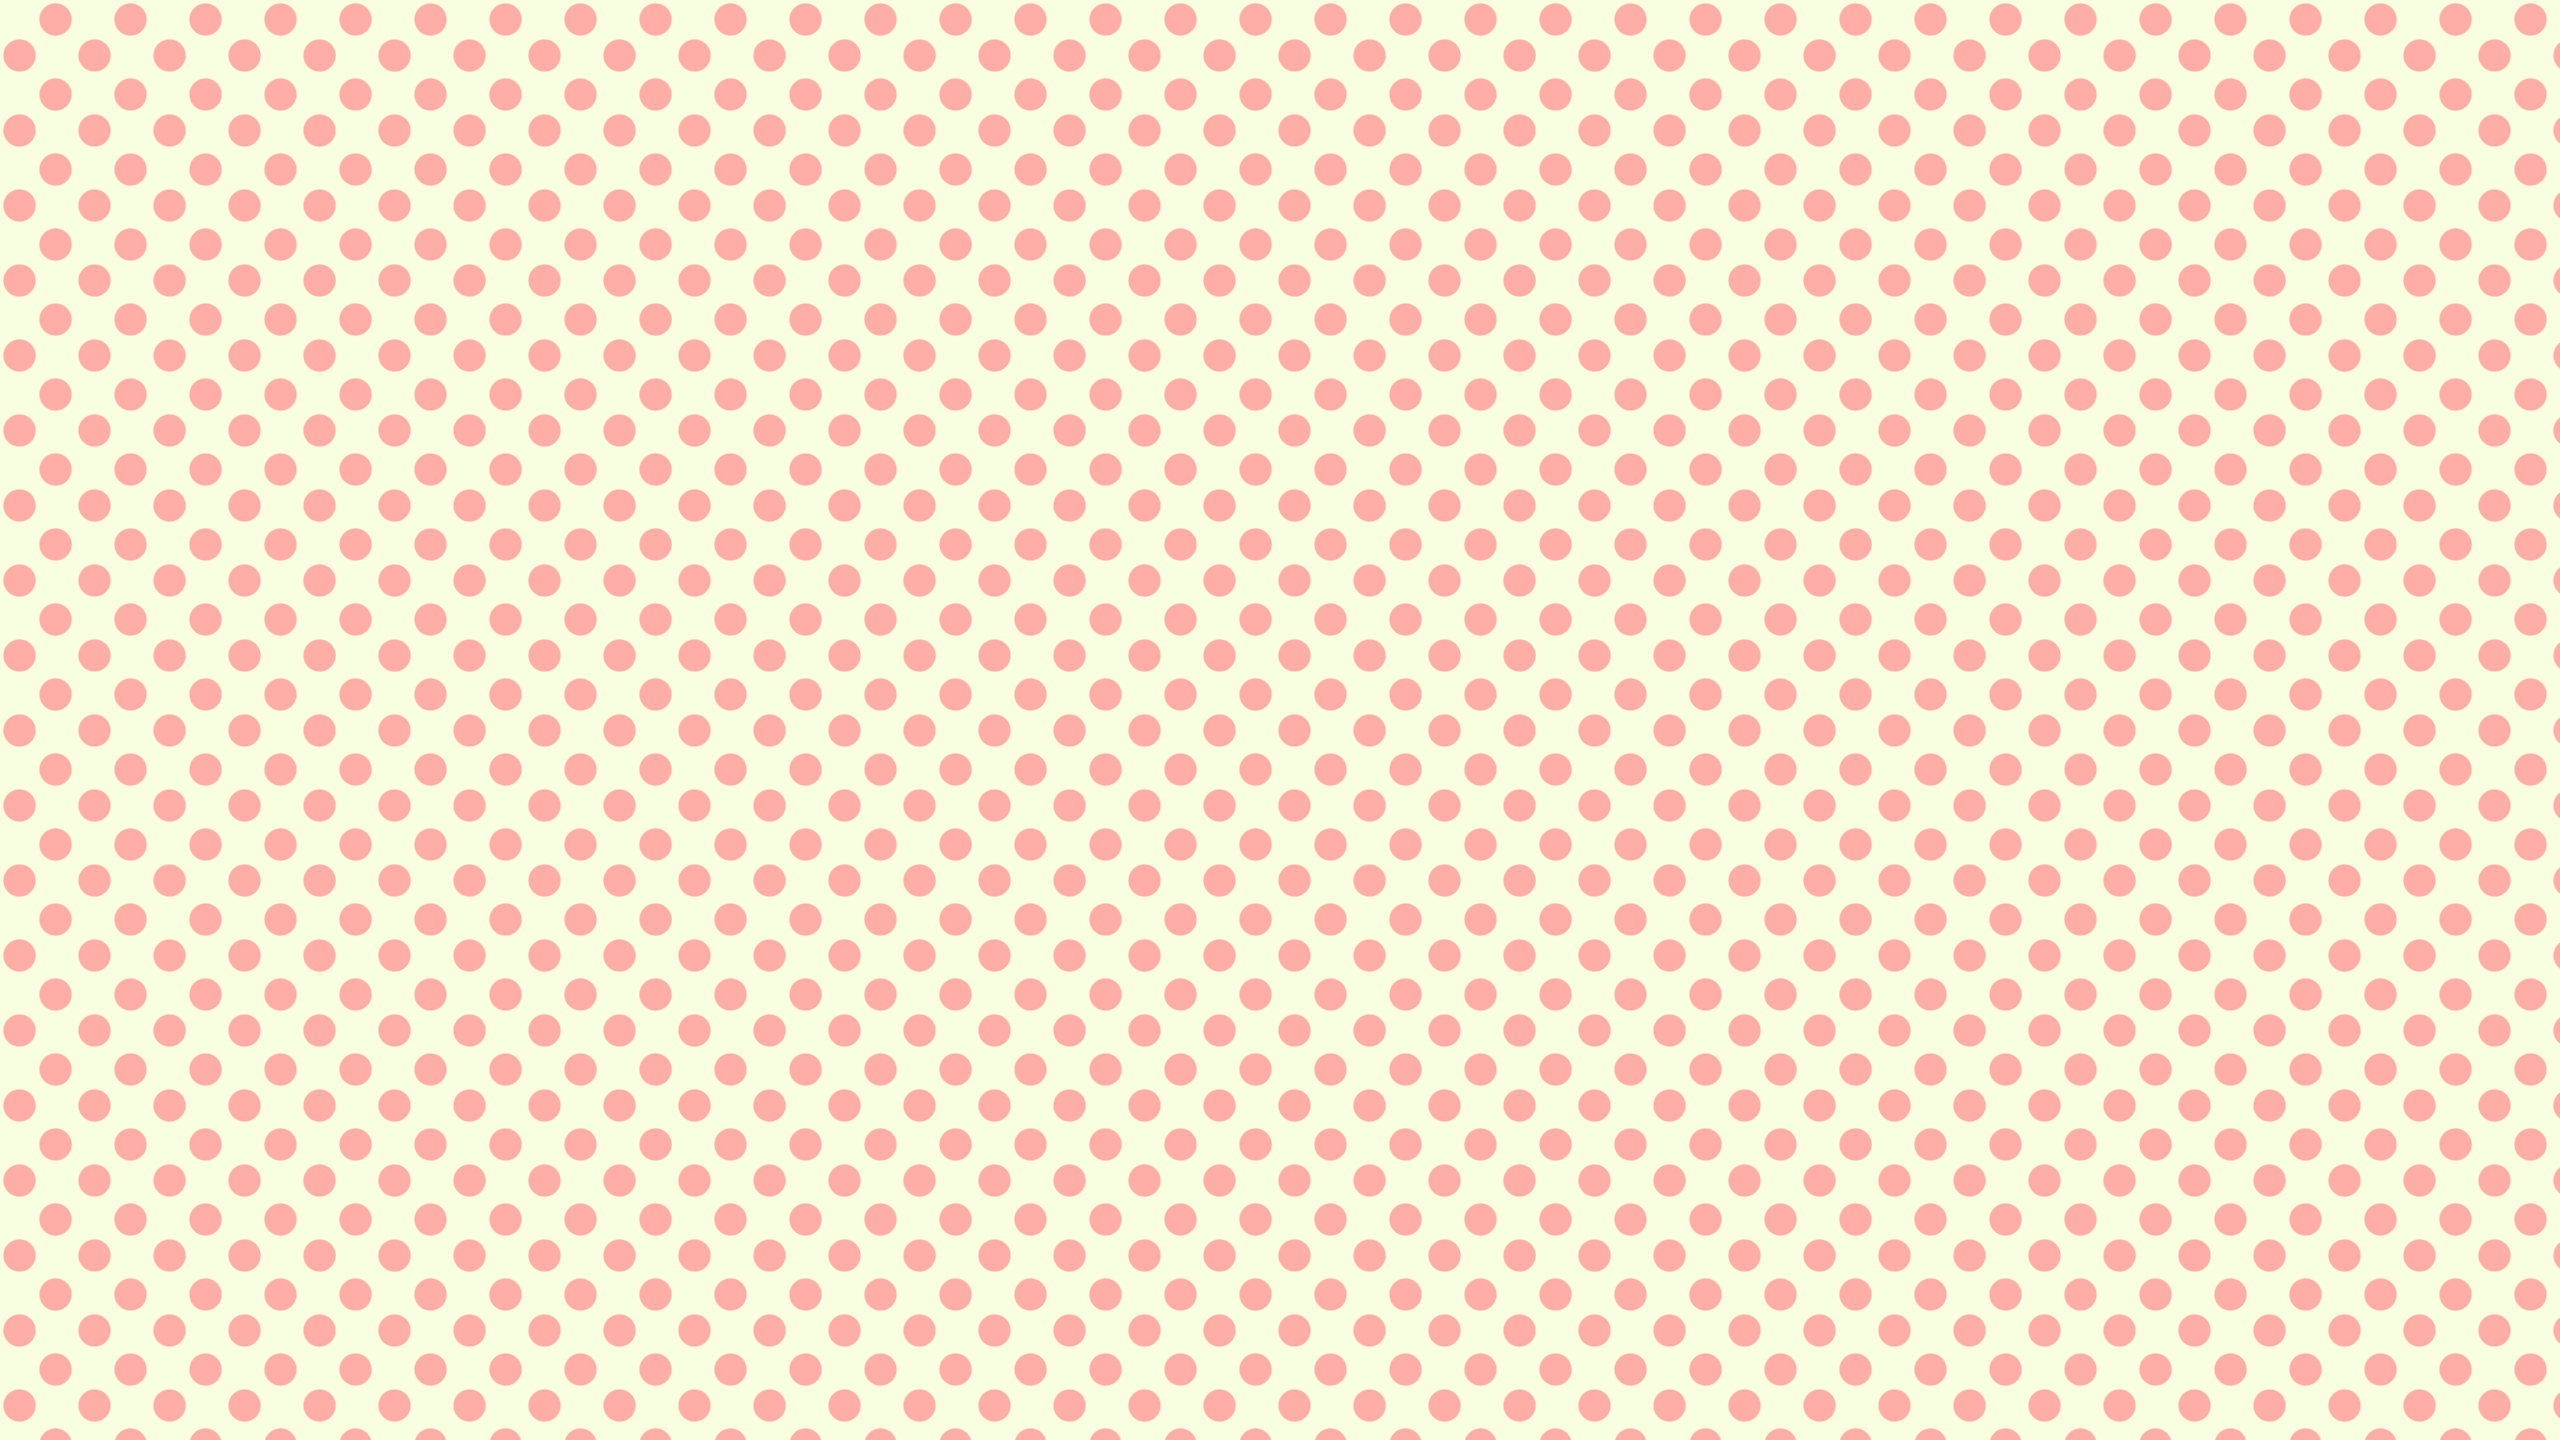 This Polka Dots Desktop Wallpaper Is Easy Just Save The